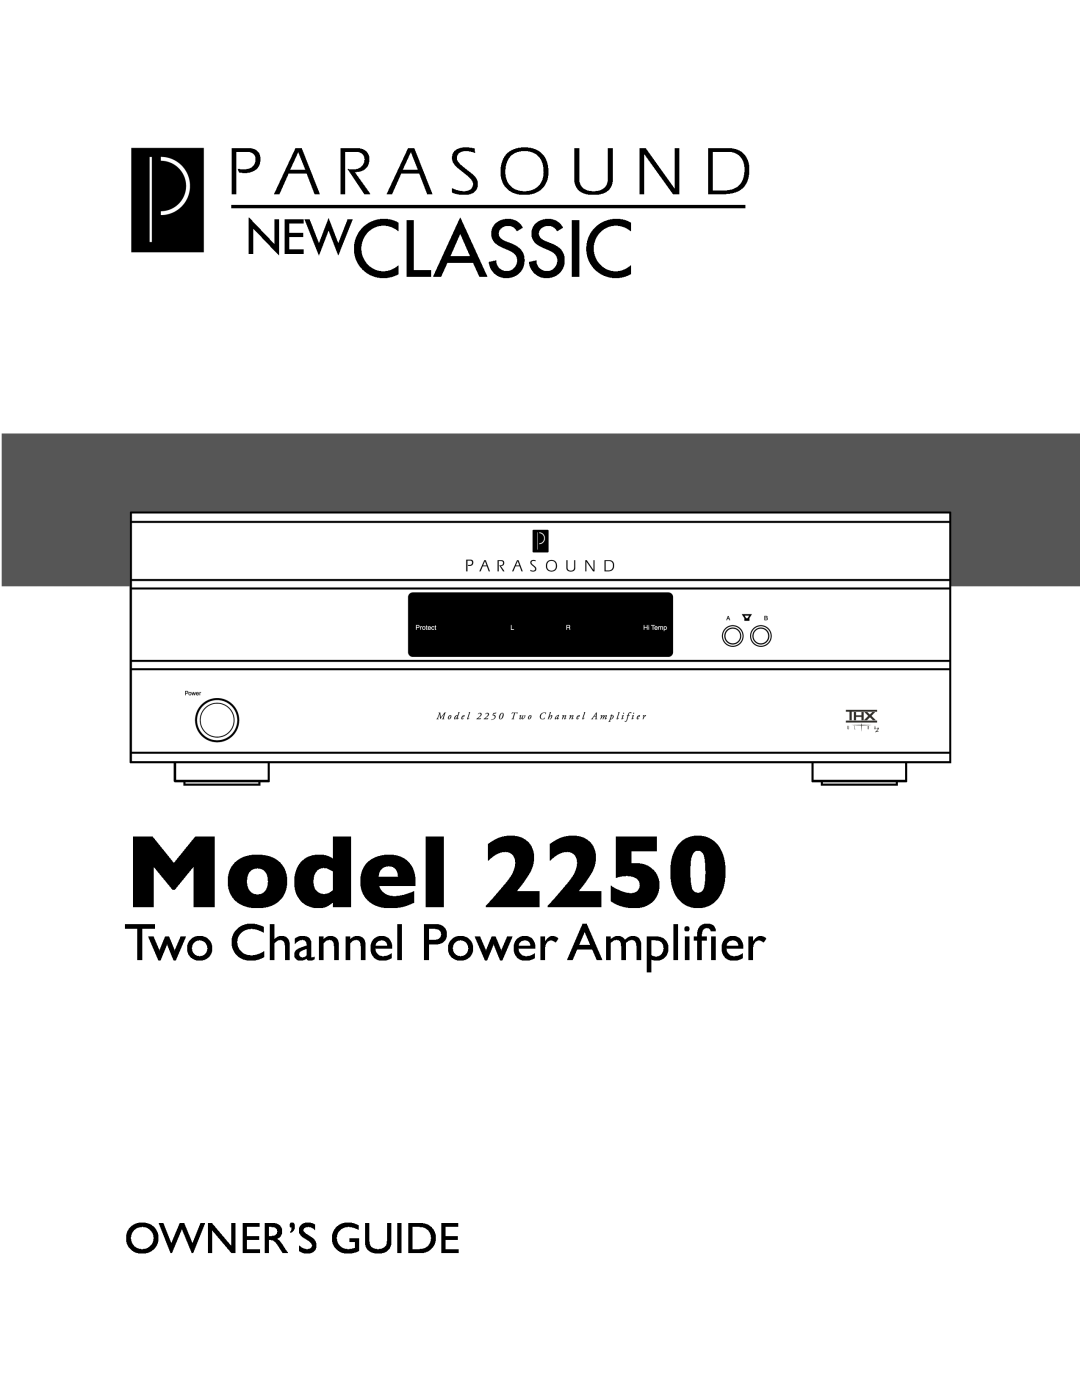 Parasound 2250 manual Model, Two Channel Power Amplifier, Owner’S Guide 